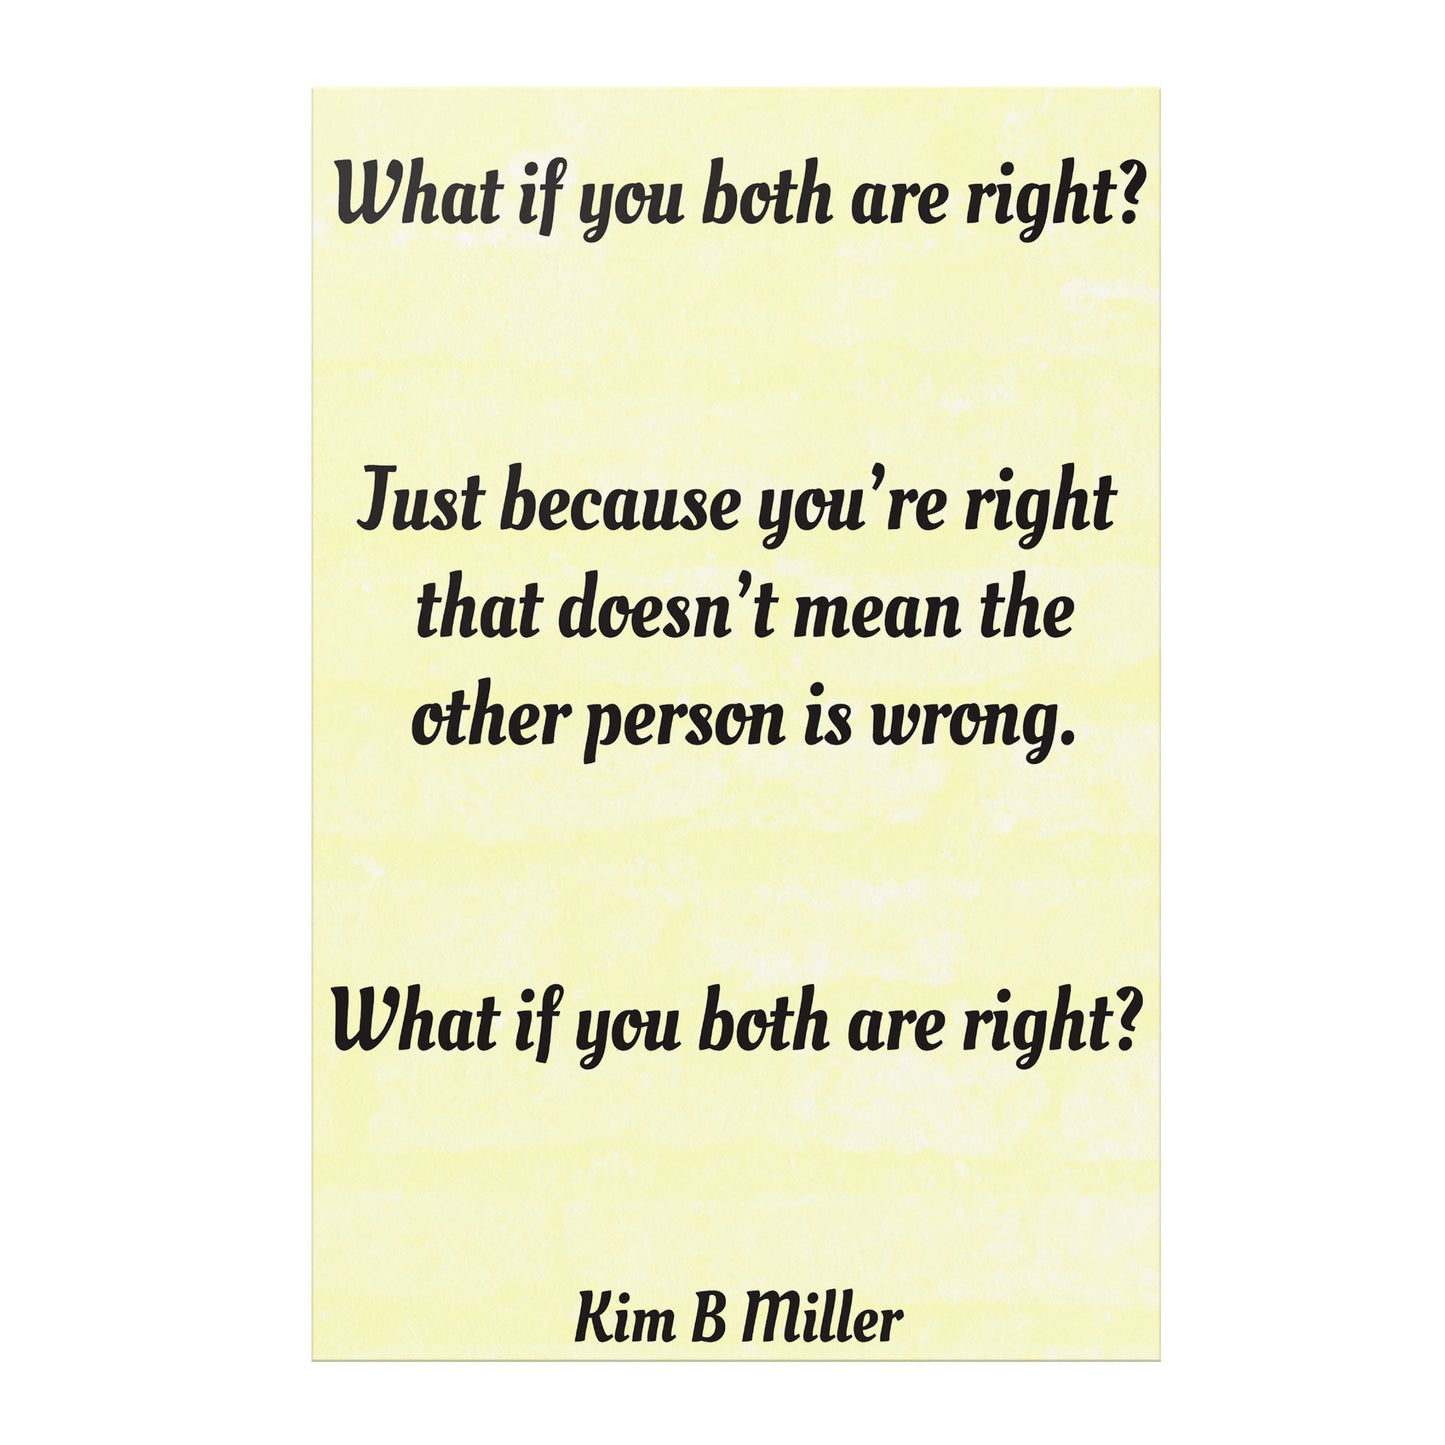 Both Right: Poster: 12" x 18"